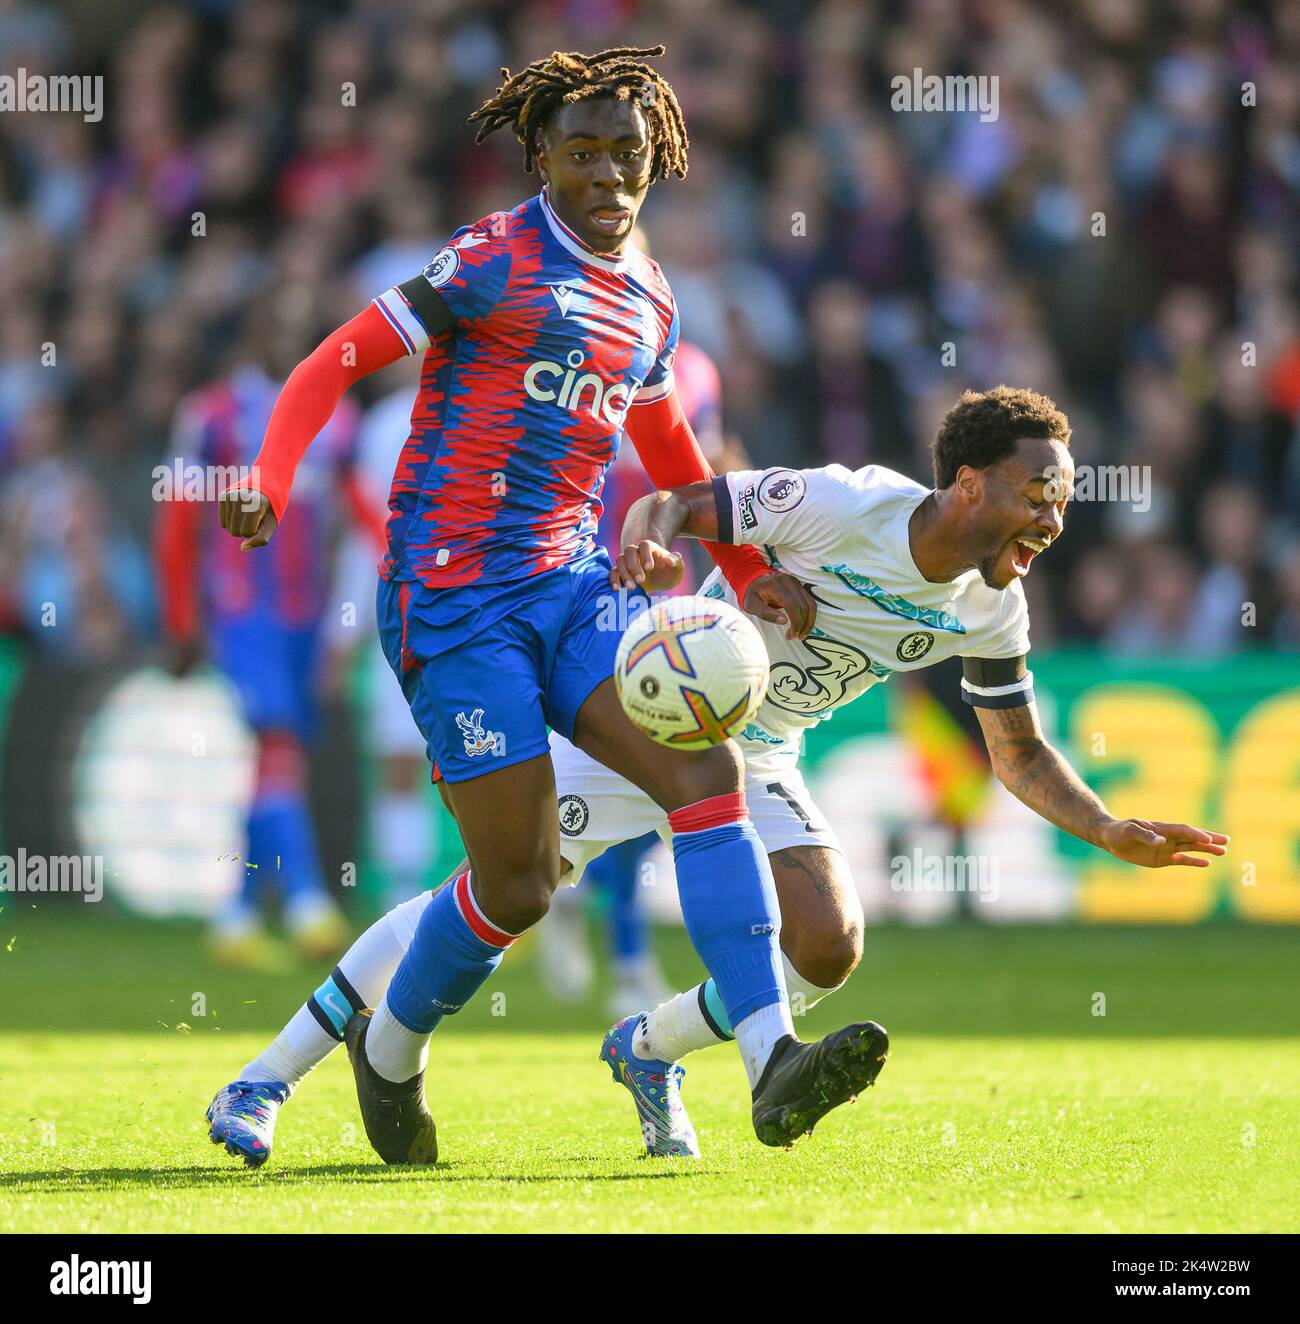 01 Oct 2022 - Crystal Palace v Chelsea - Premier League - Selhurst Park  Crystal Palace's Eberechi Eze and Raheem Sterling during the Premier League match at Selhurst Park. Picture : Mark Pain / Alamy Live News Stock Photo